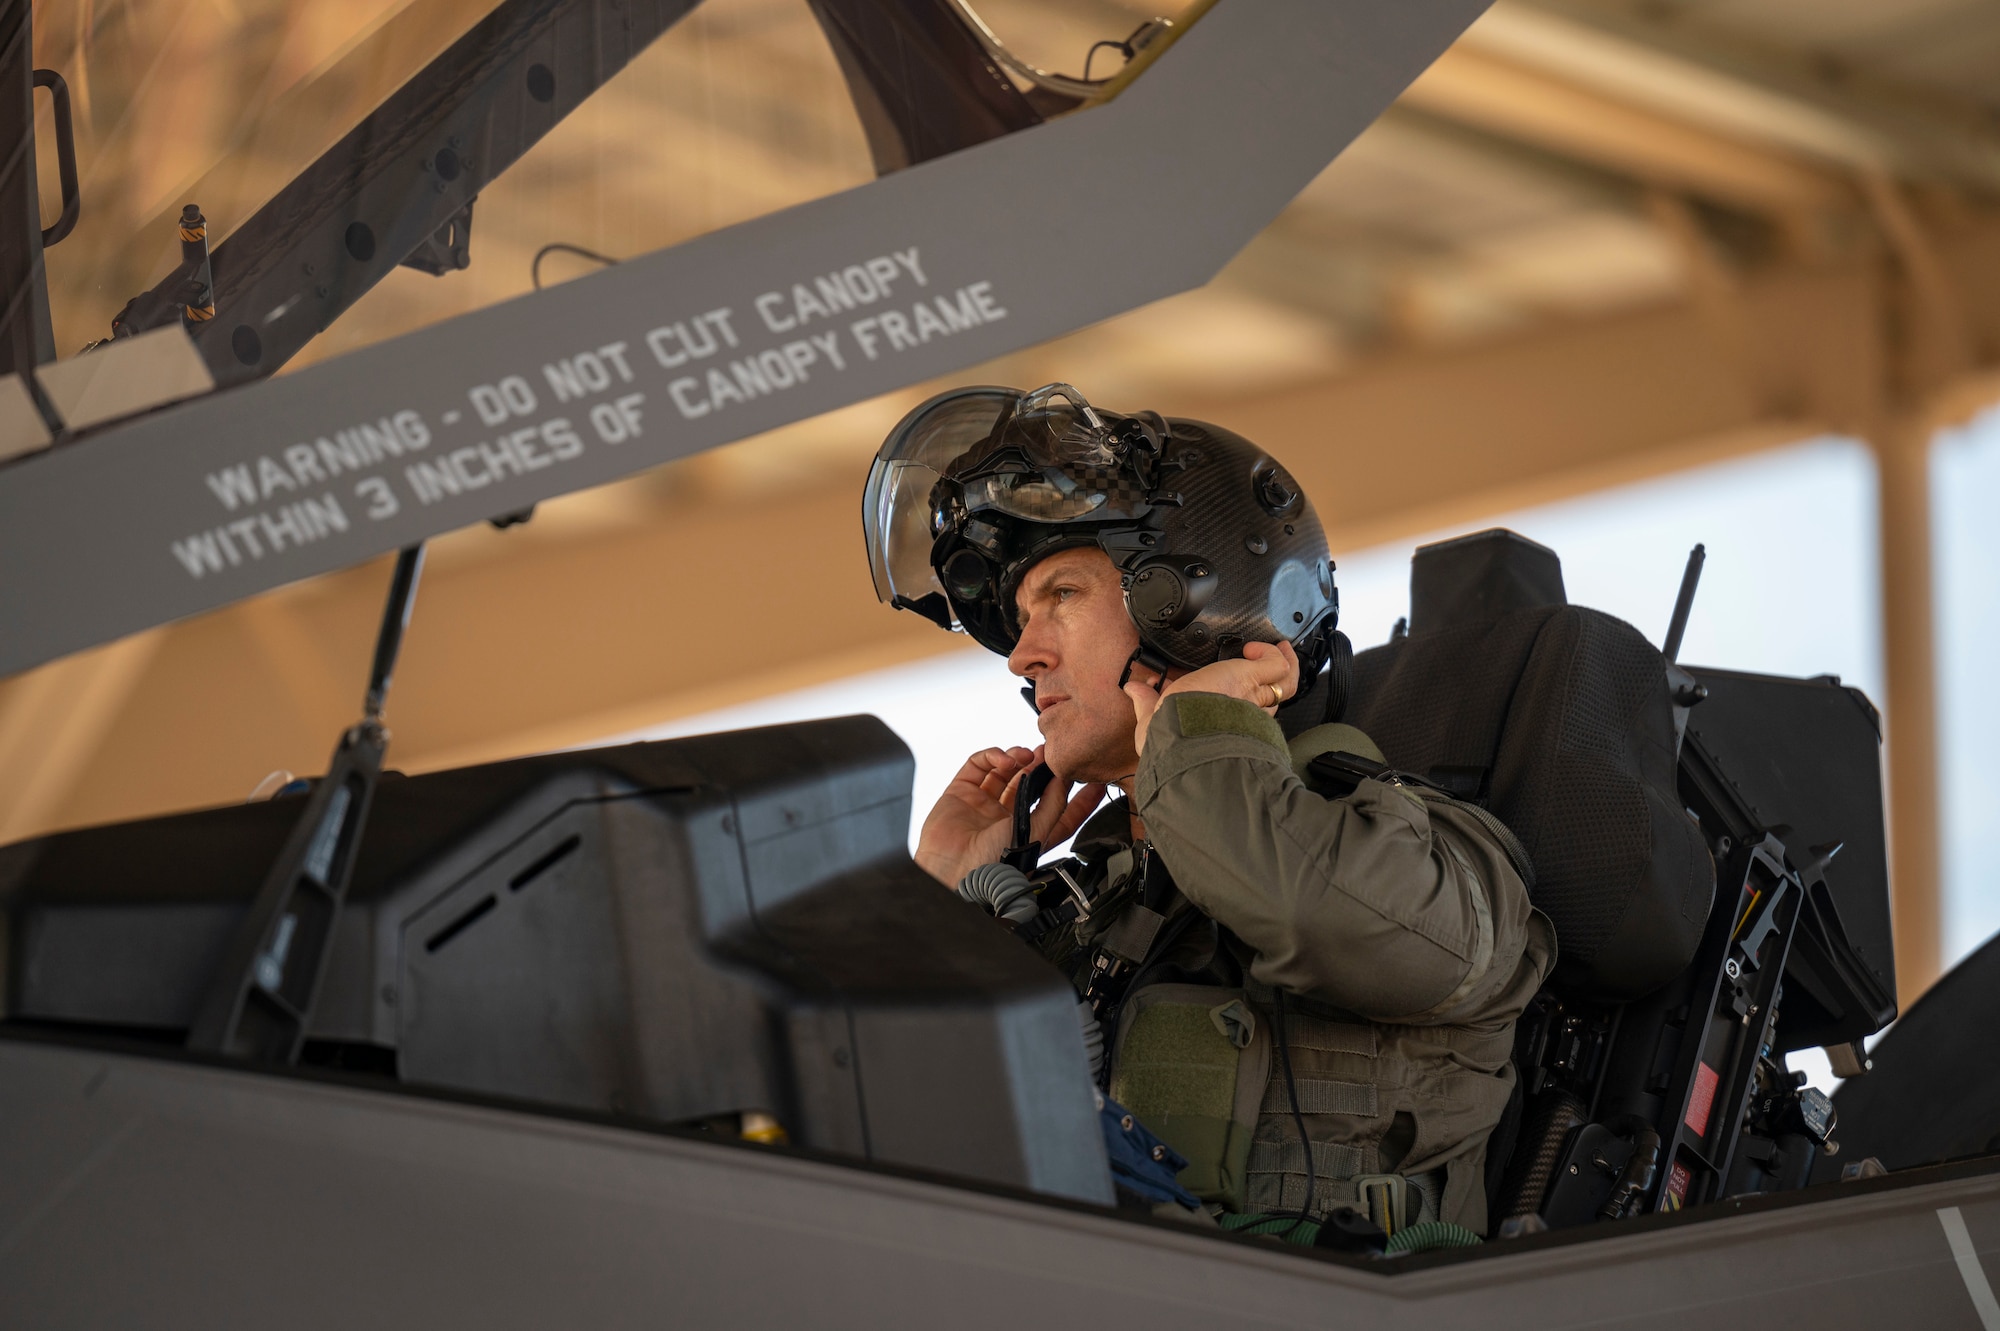 Brig. Gen. Michael Rawls, Air Force Operational Test and Evaluation Center (AFOTEC) commander, secures his helmet in an F-35A Lightning II at Nellis Air Force Base, Nevada, Jan. 12, 2023. As the commander of AFOTEC, Gen. Rawls is responsible for the independent testing and evaluation of new and existing systems for the Air Force. (U.S. Air Force Photo by Airman First Class Trevor Bell)